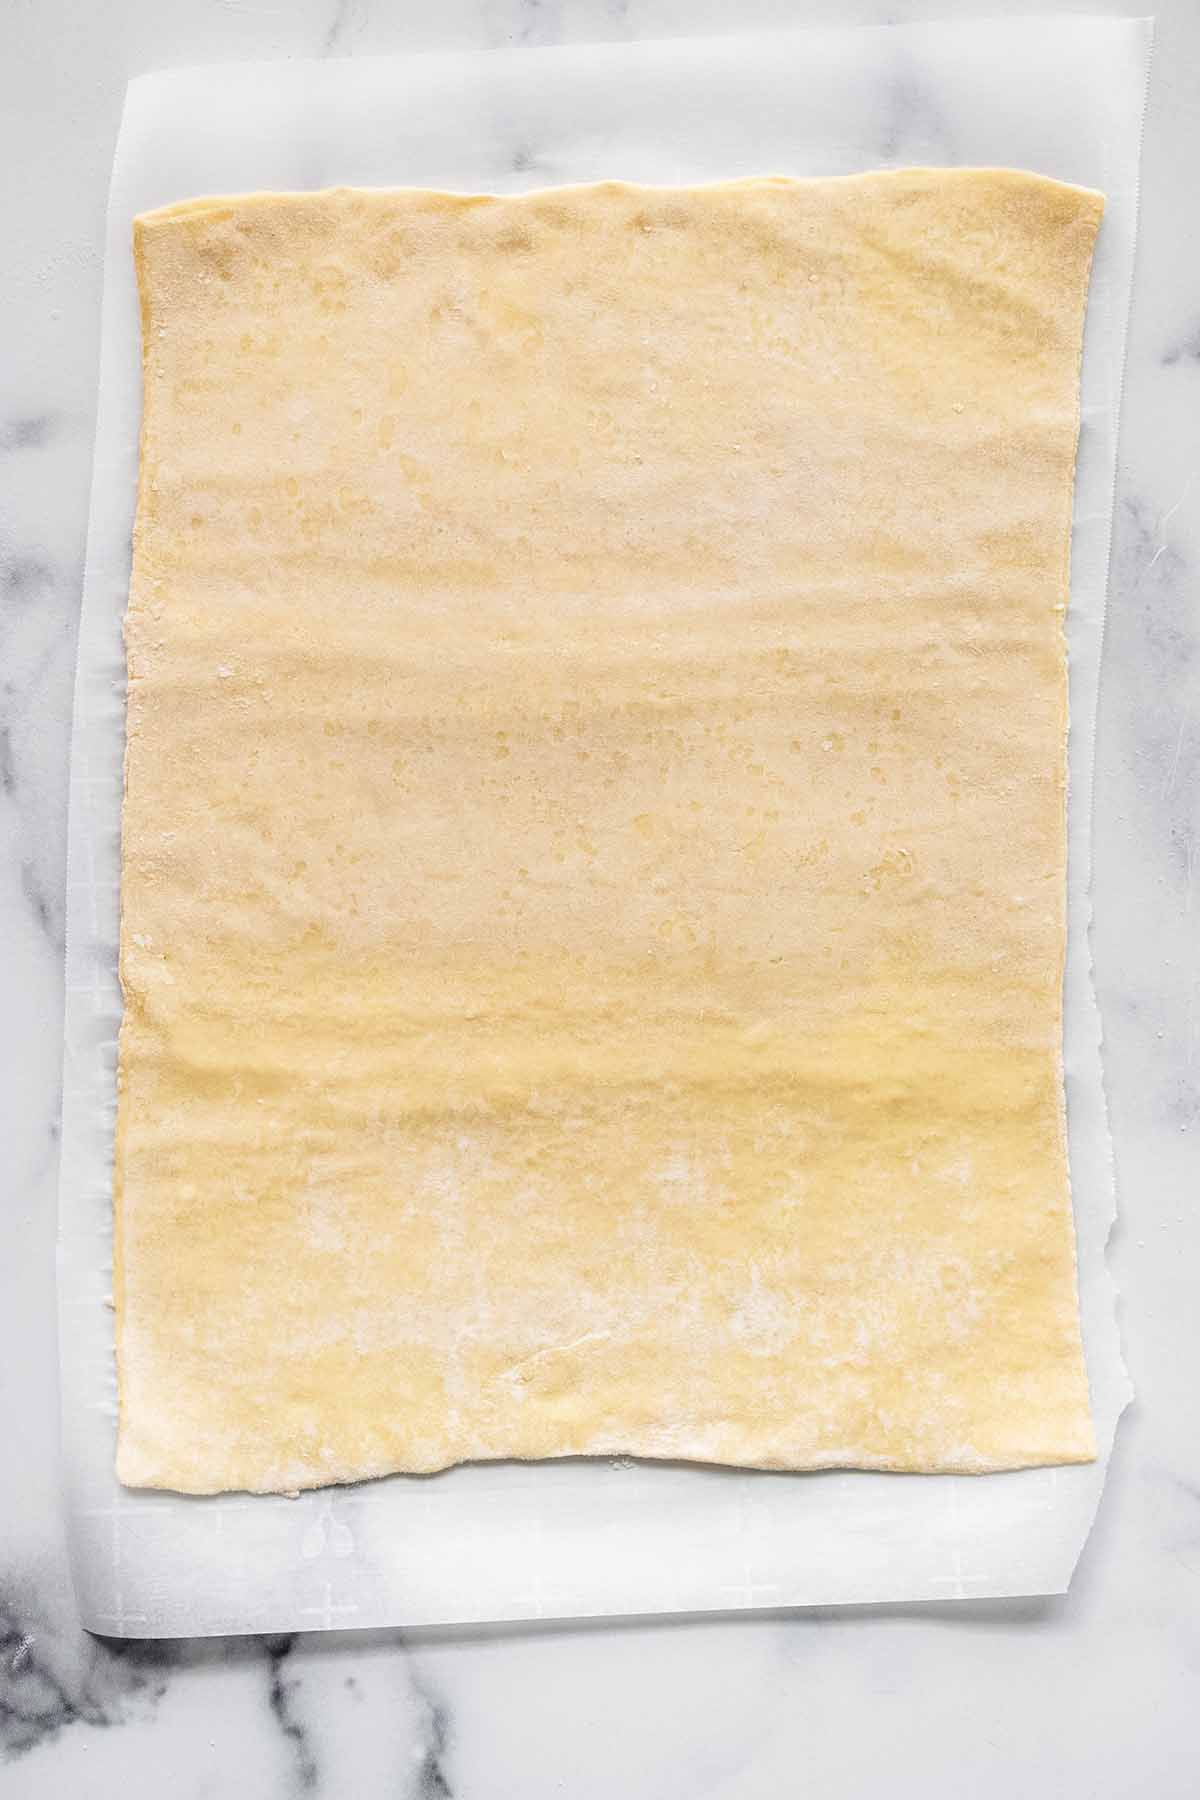 Puff pastry sheet on parchment paper on a marble countertop.